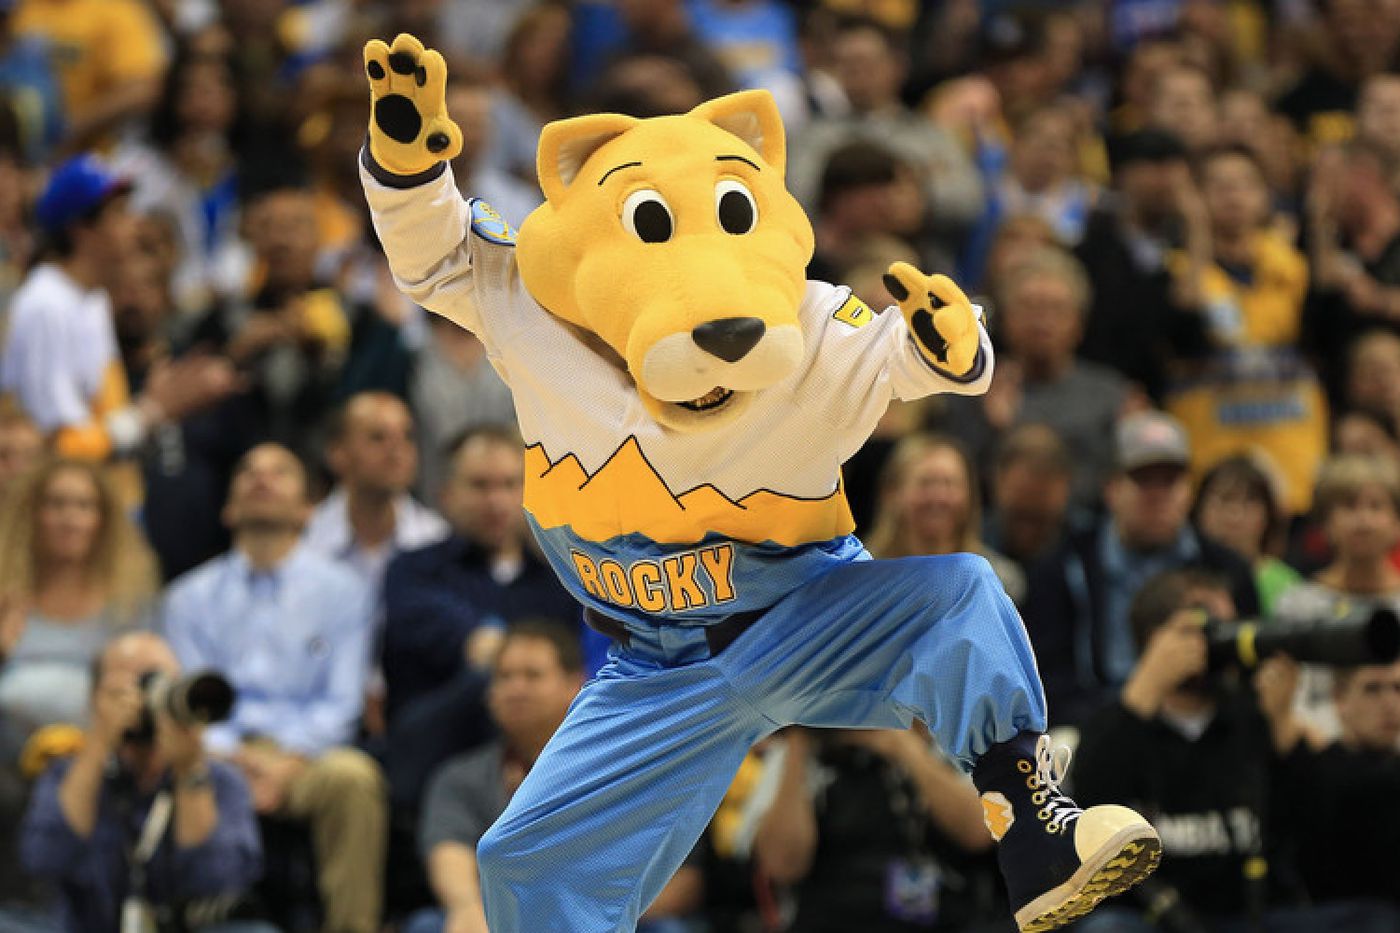 Rocky, mascot of the Denver Nuggets